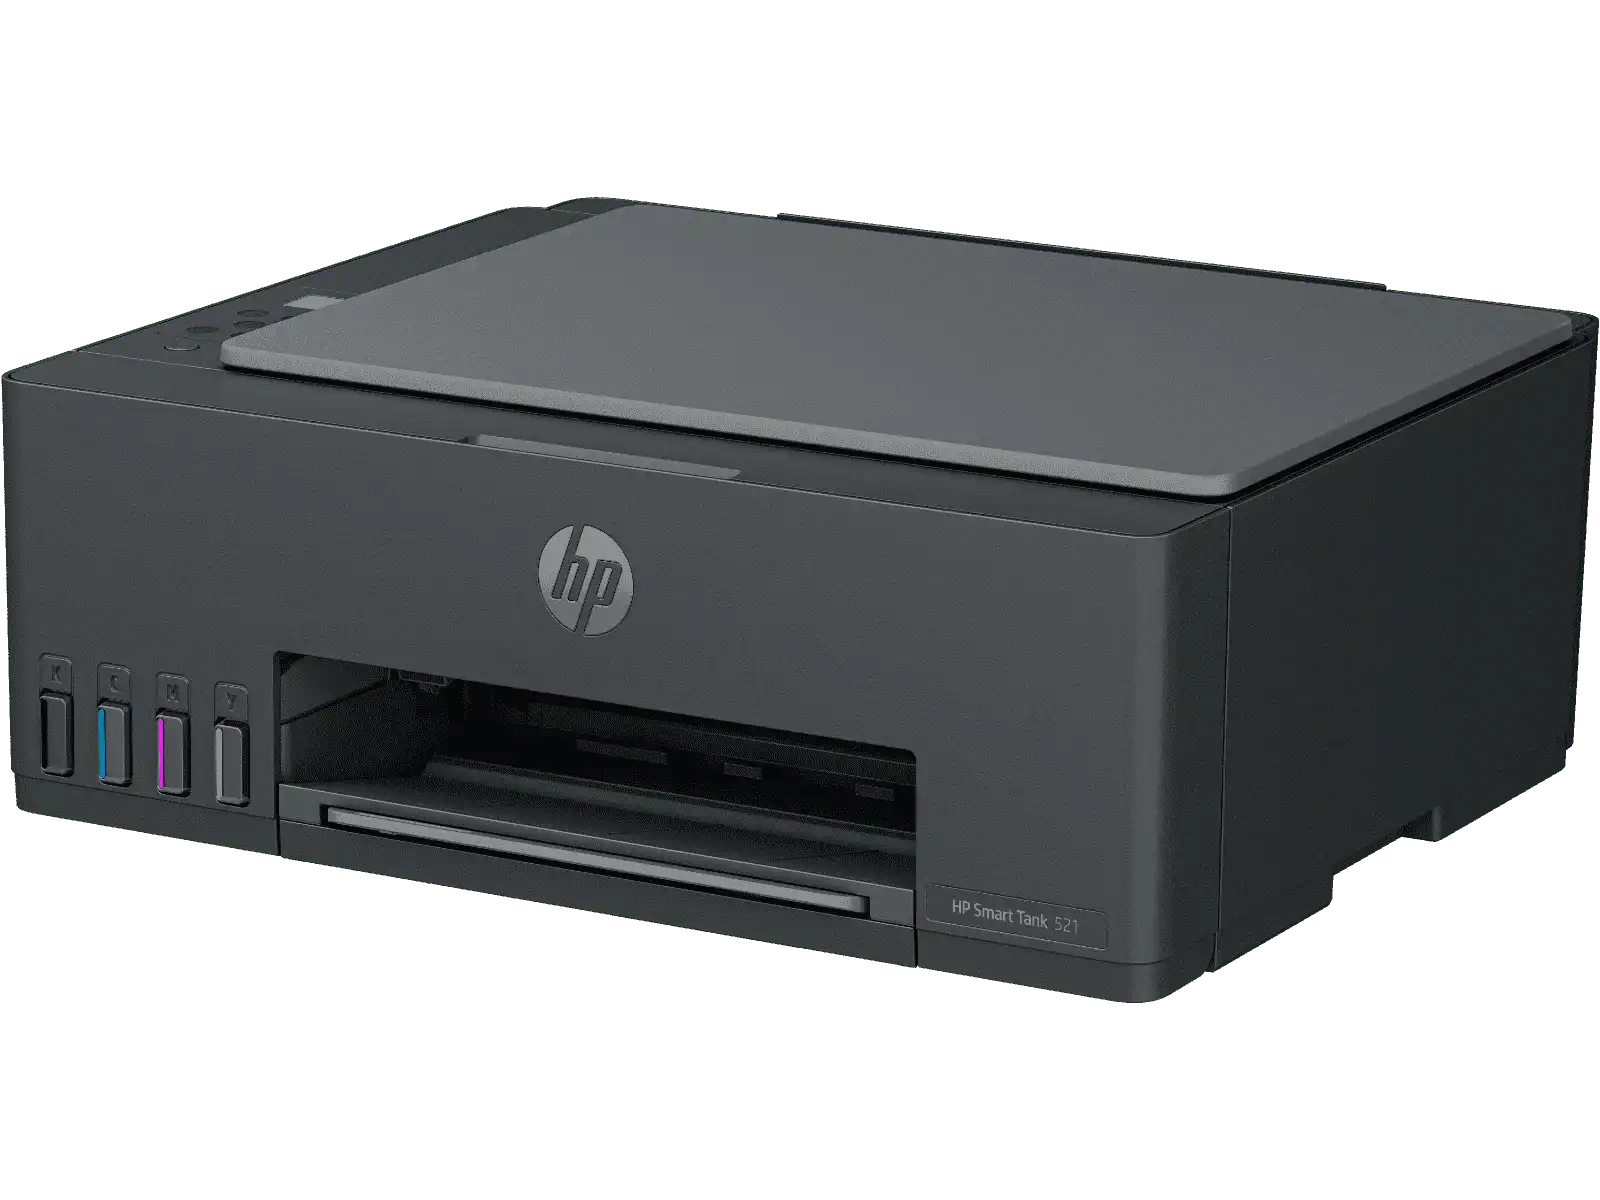 HP 4A8R9A Smart Tank 521 All-in-One Printer